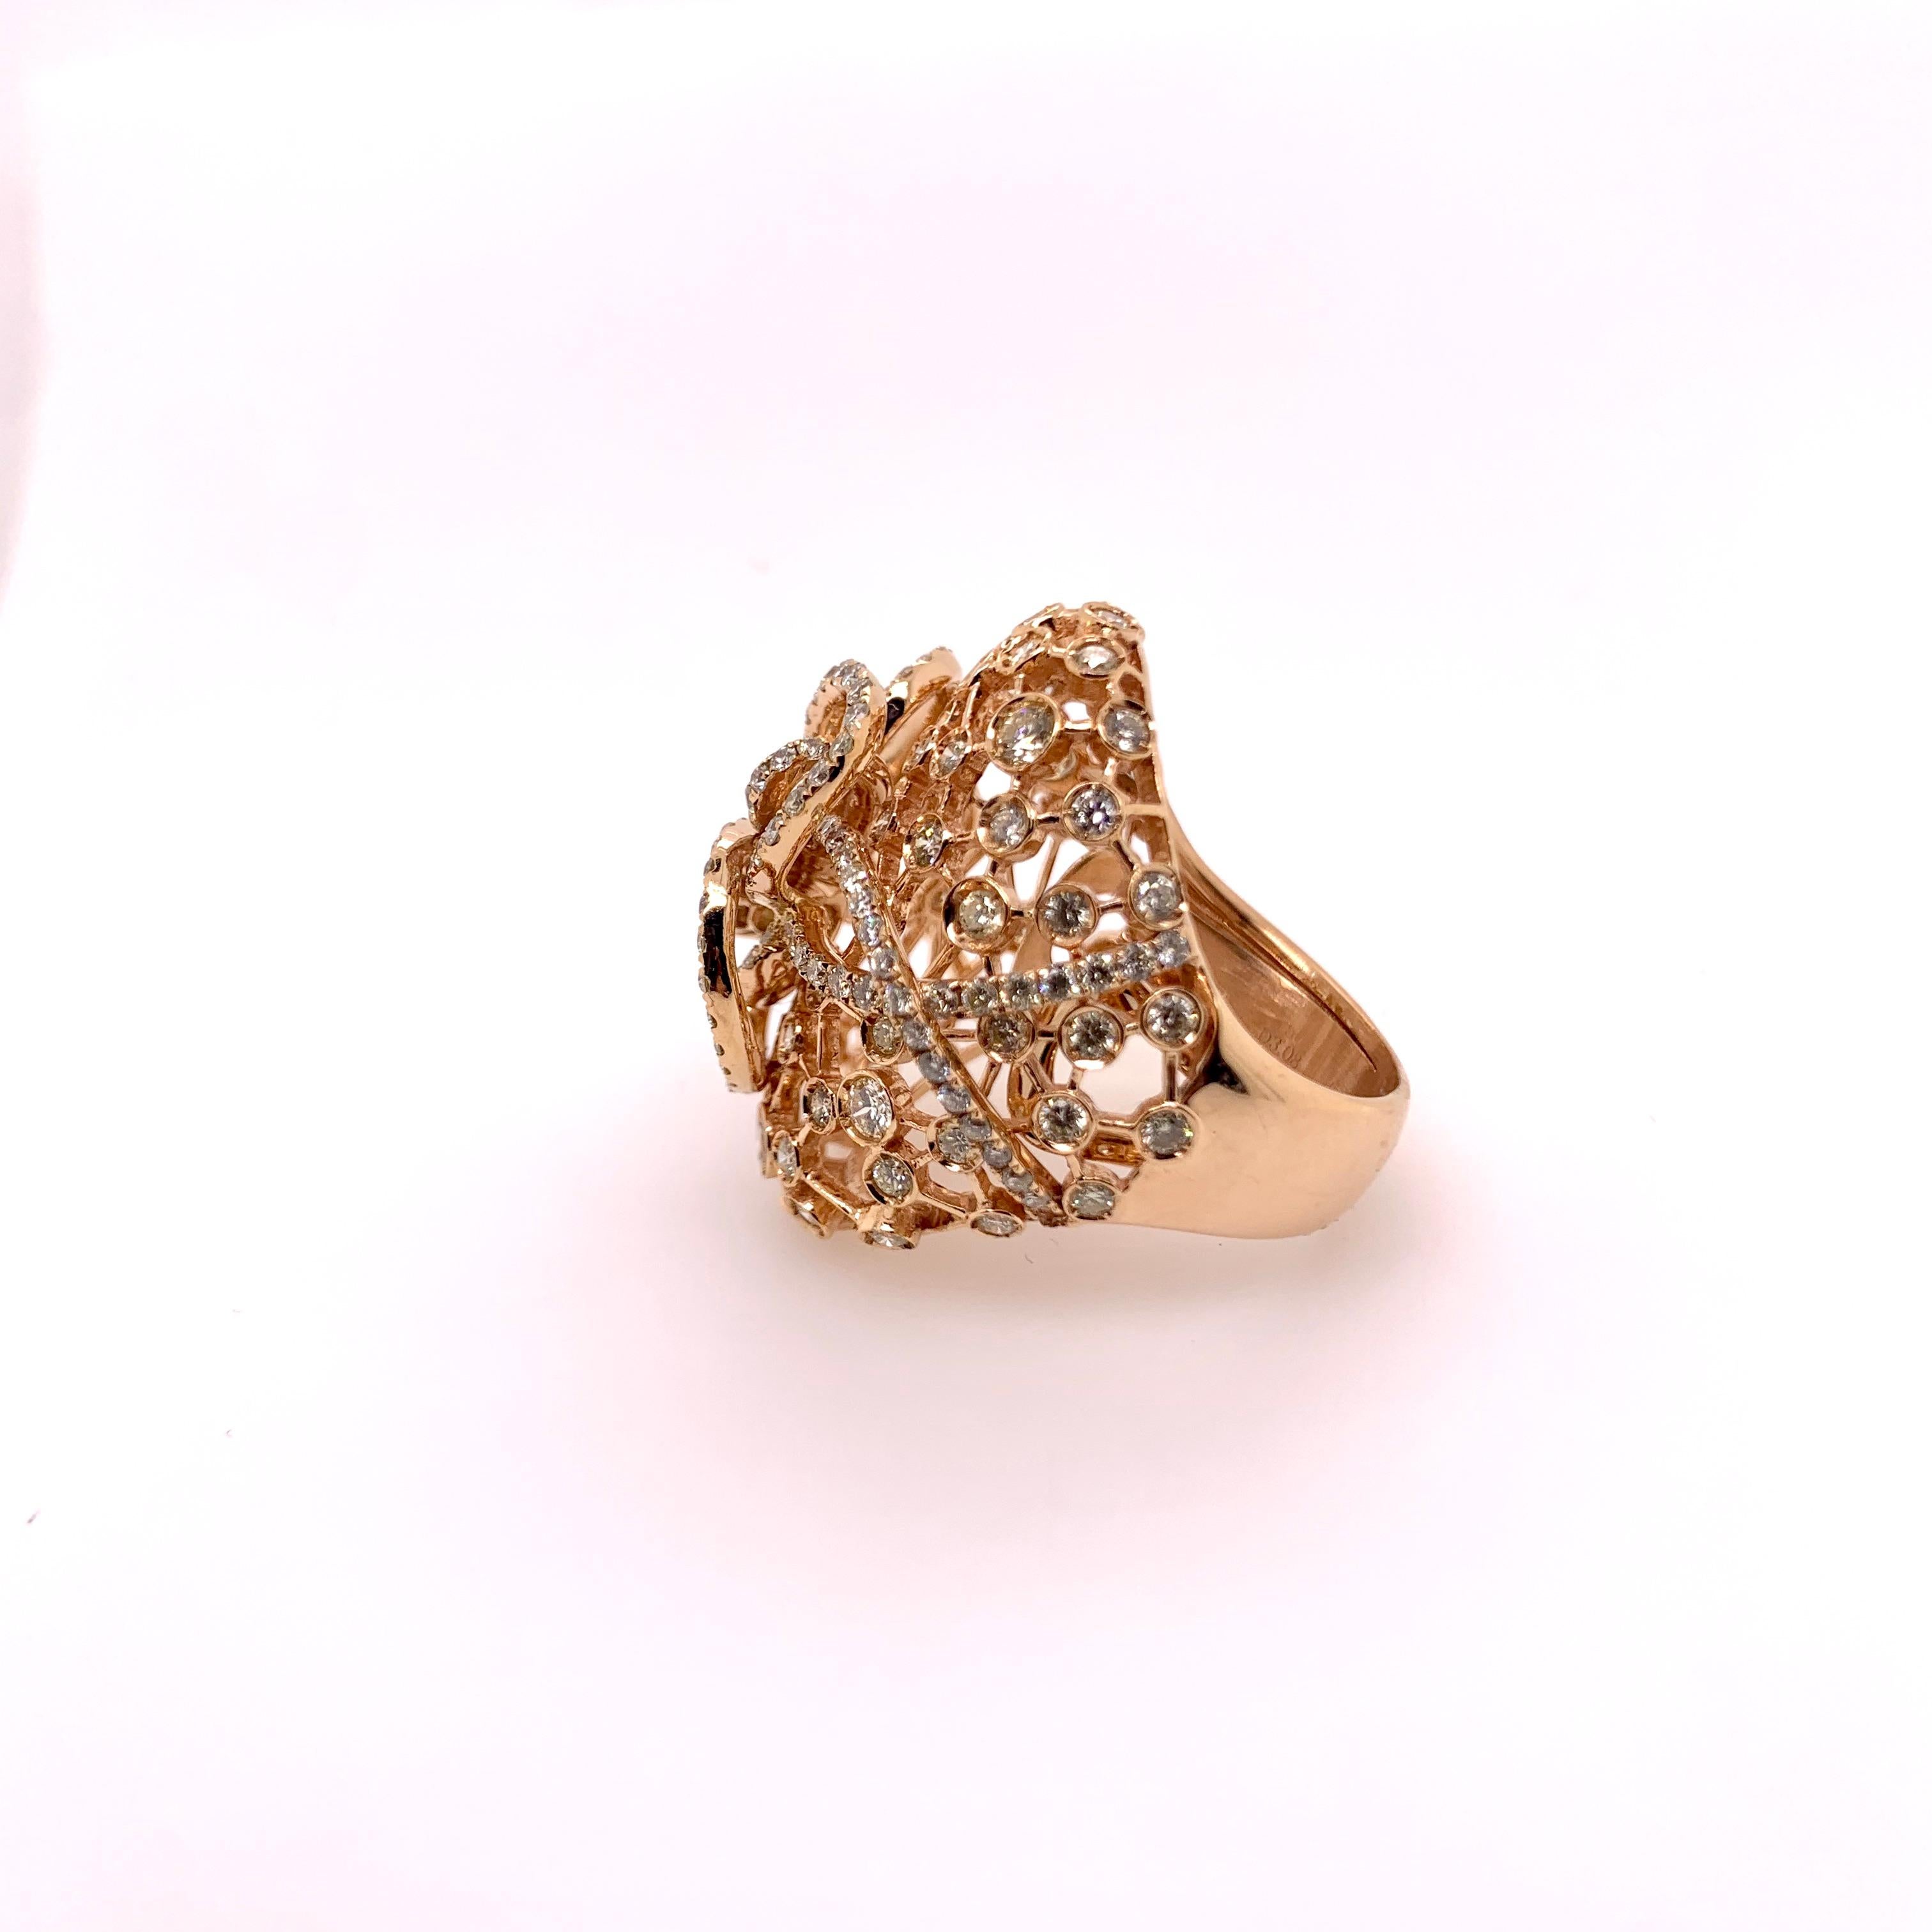 Elaborate diamond cocktail ring with all artistic curves and designs!   This stunning 18k rose gold diamond cocktail ring has so much detail to its design that its an art piece for your finger!   The round brilliant diamonds are bezel and prong set